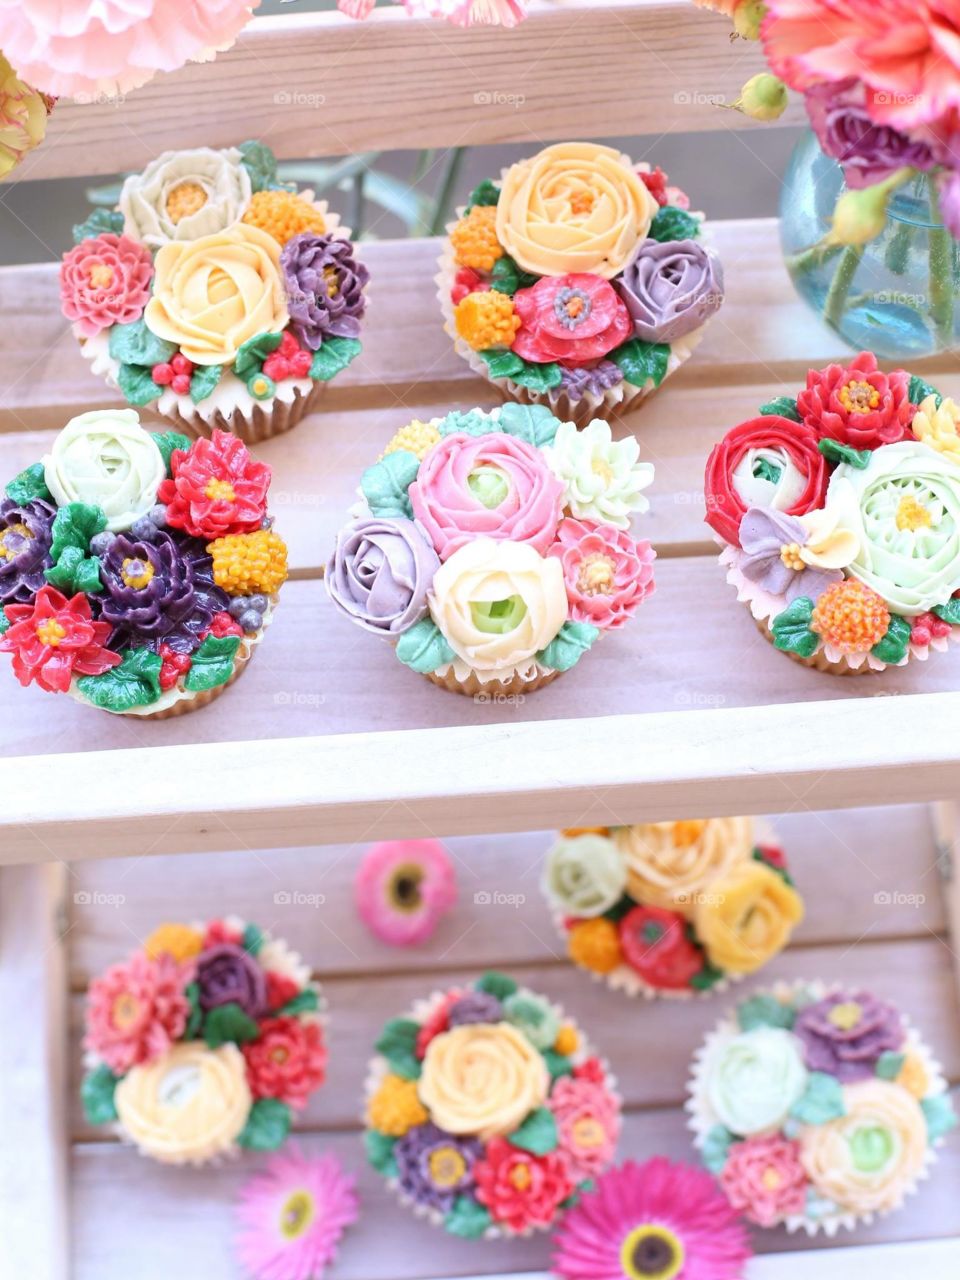 A Cupcake of flowers 